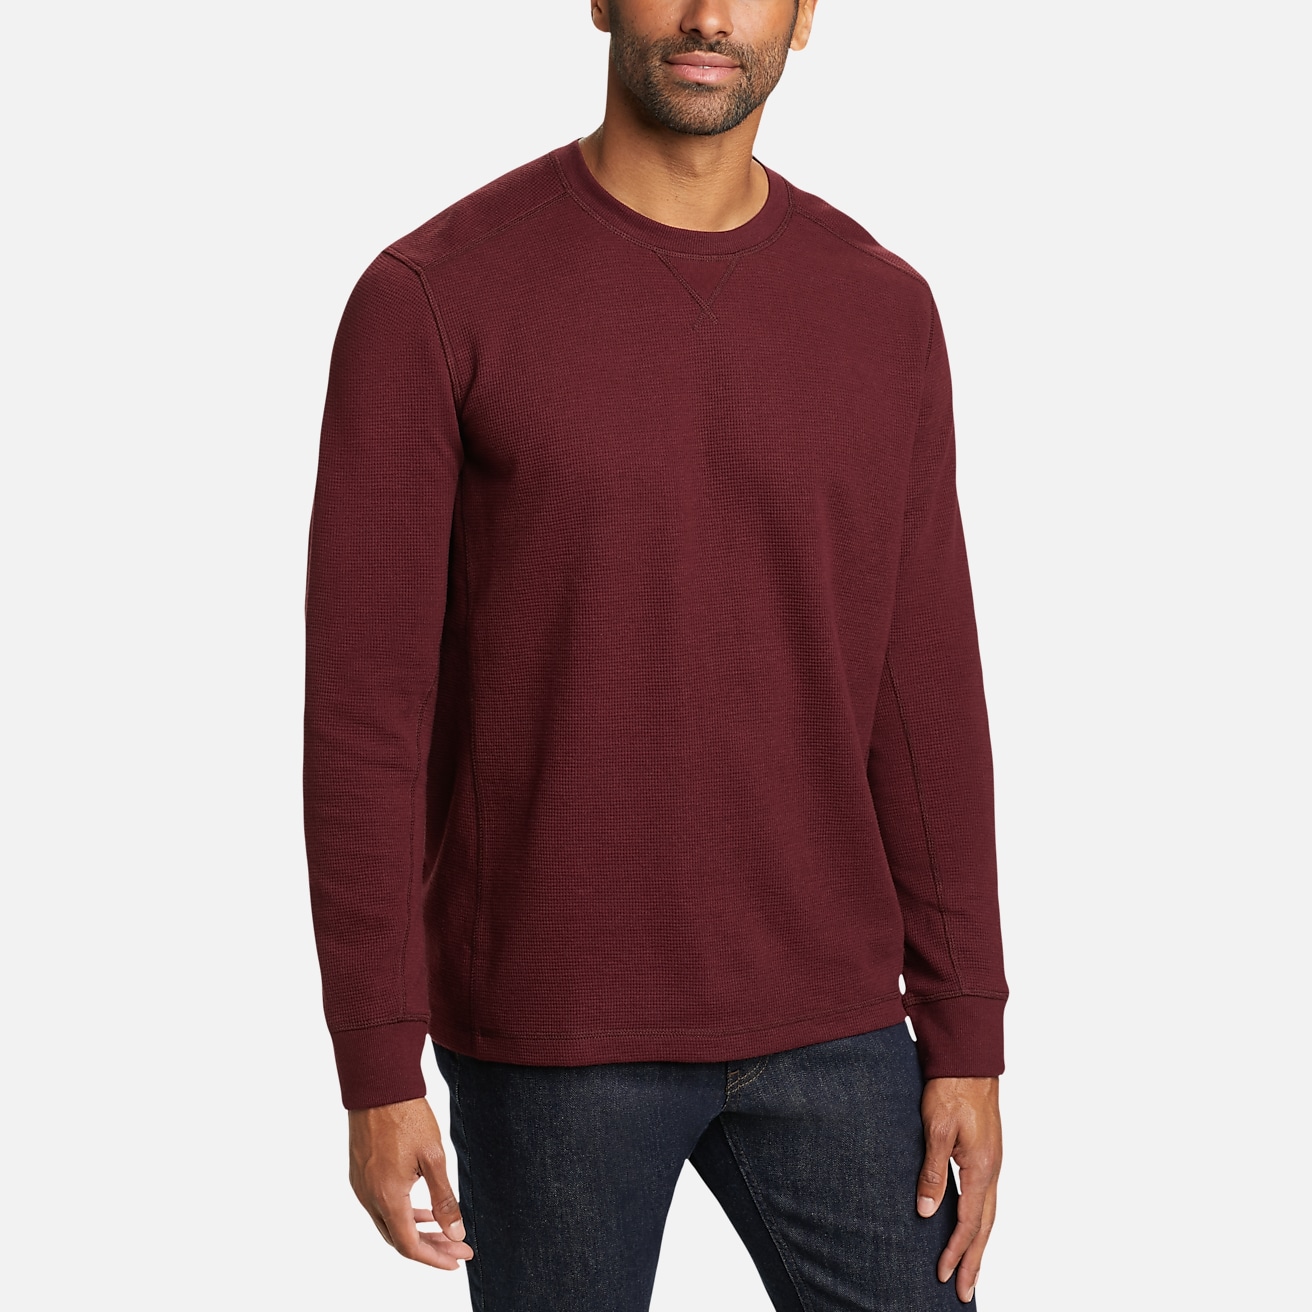 Eddie Bauer Classic Fit Crewneck Long Sleeve Thermal Shirt, All Sale